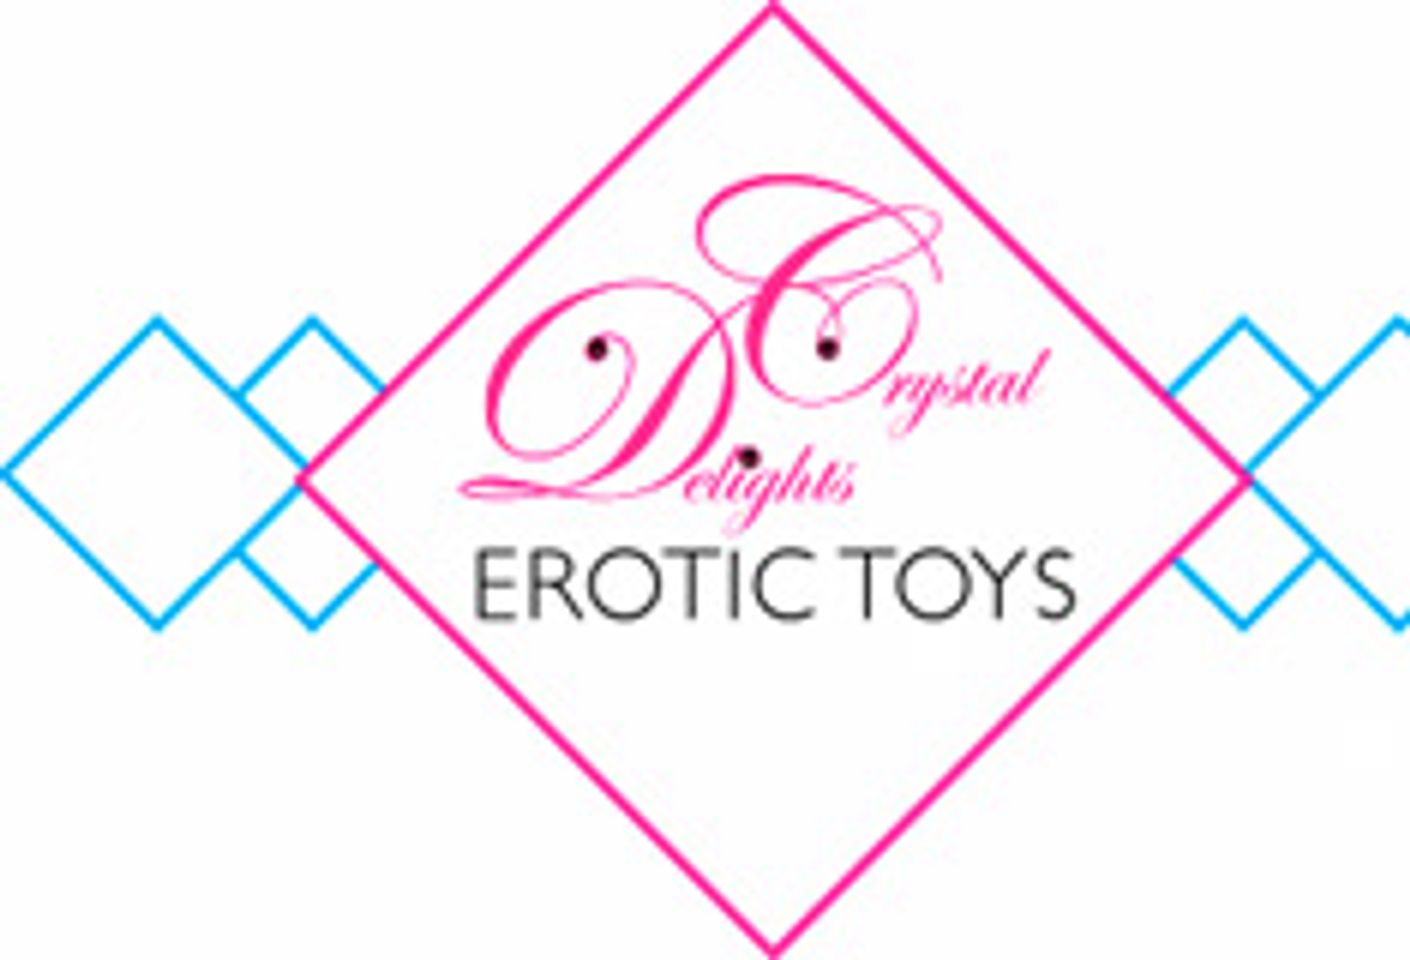 Crystal Delights, Merci Toys to Showcase New Products at BBWFanFest